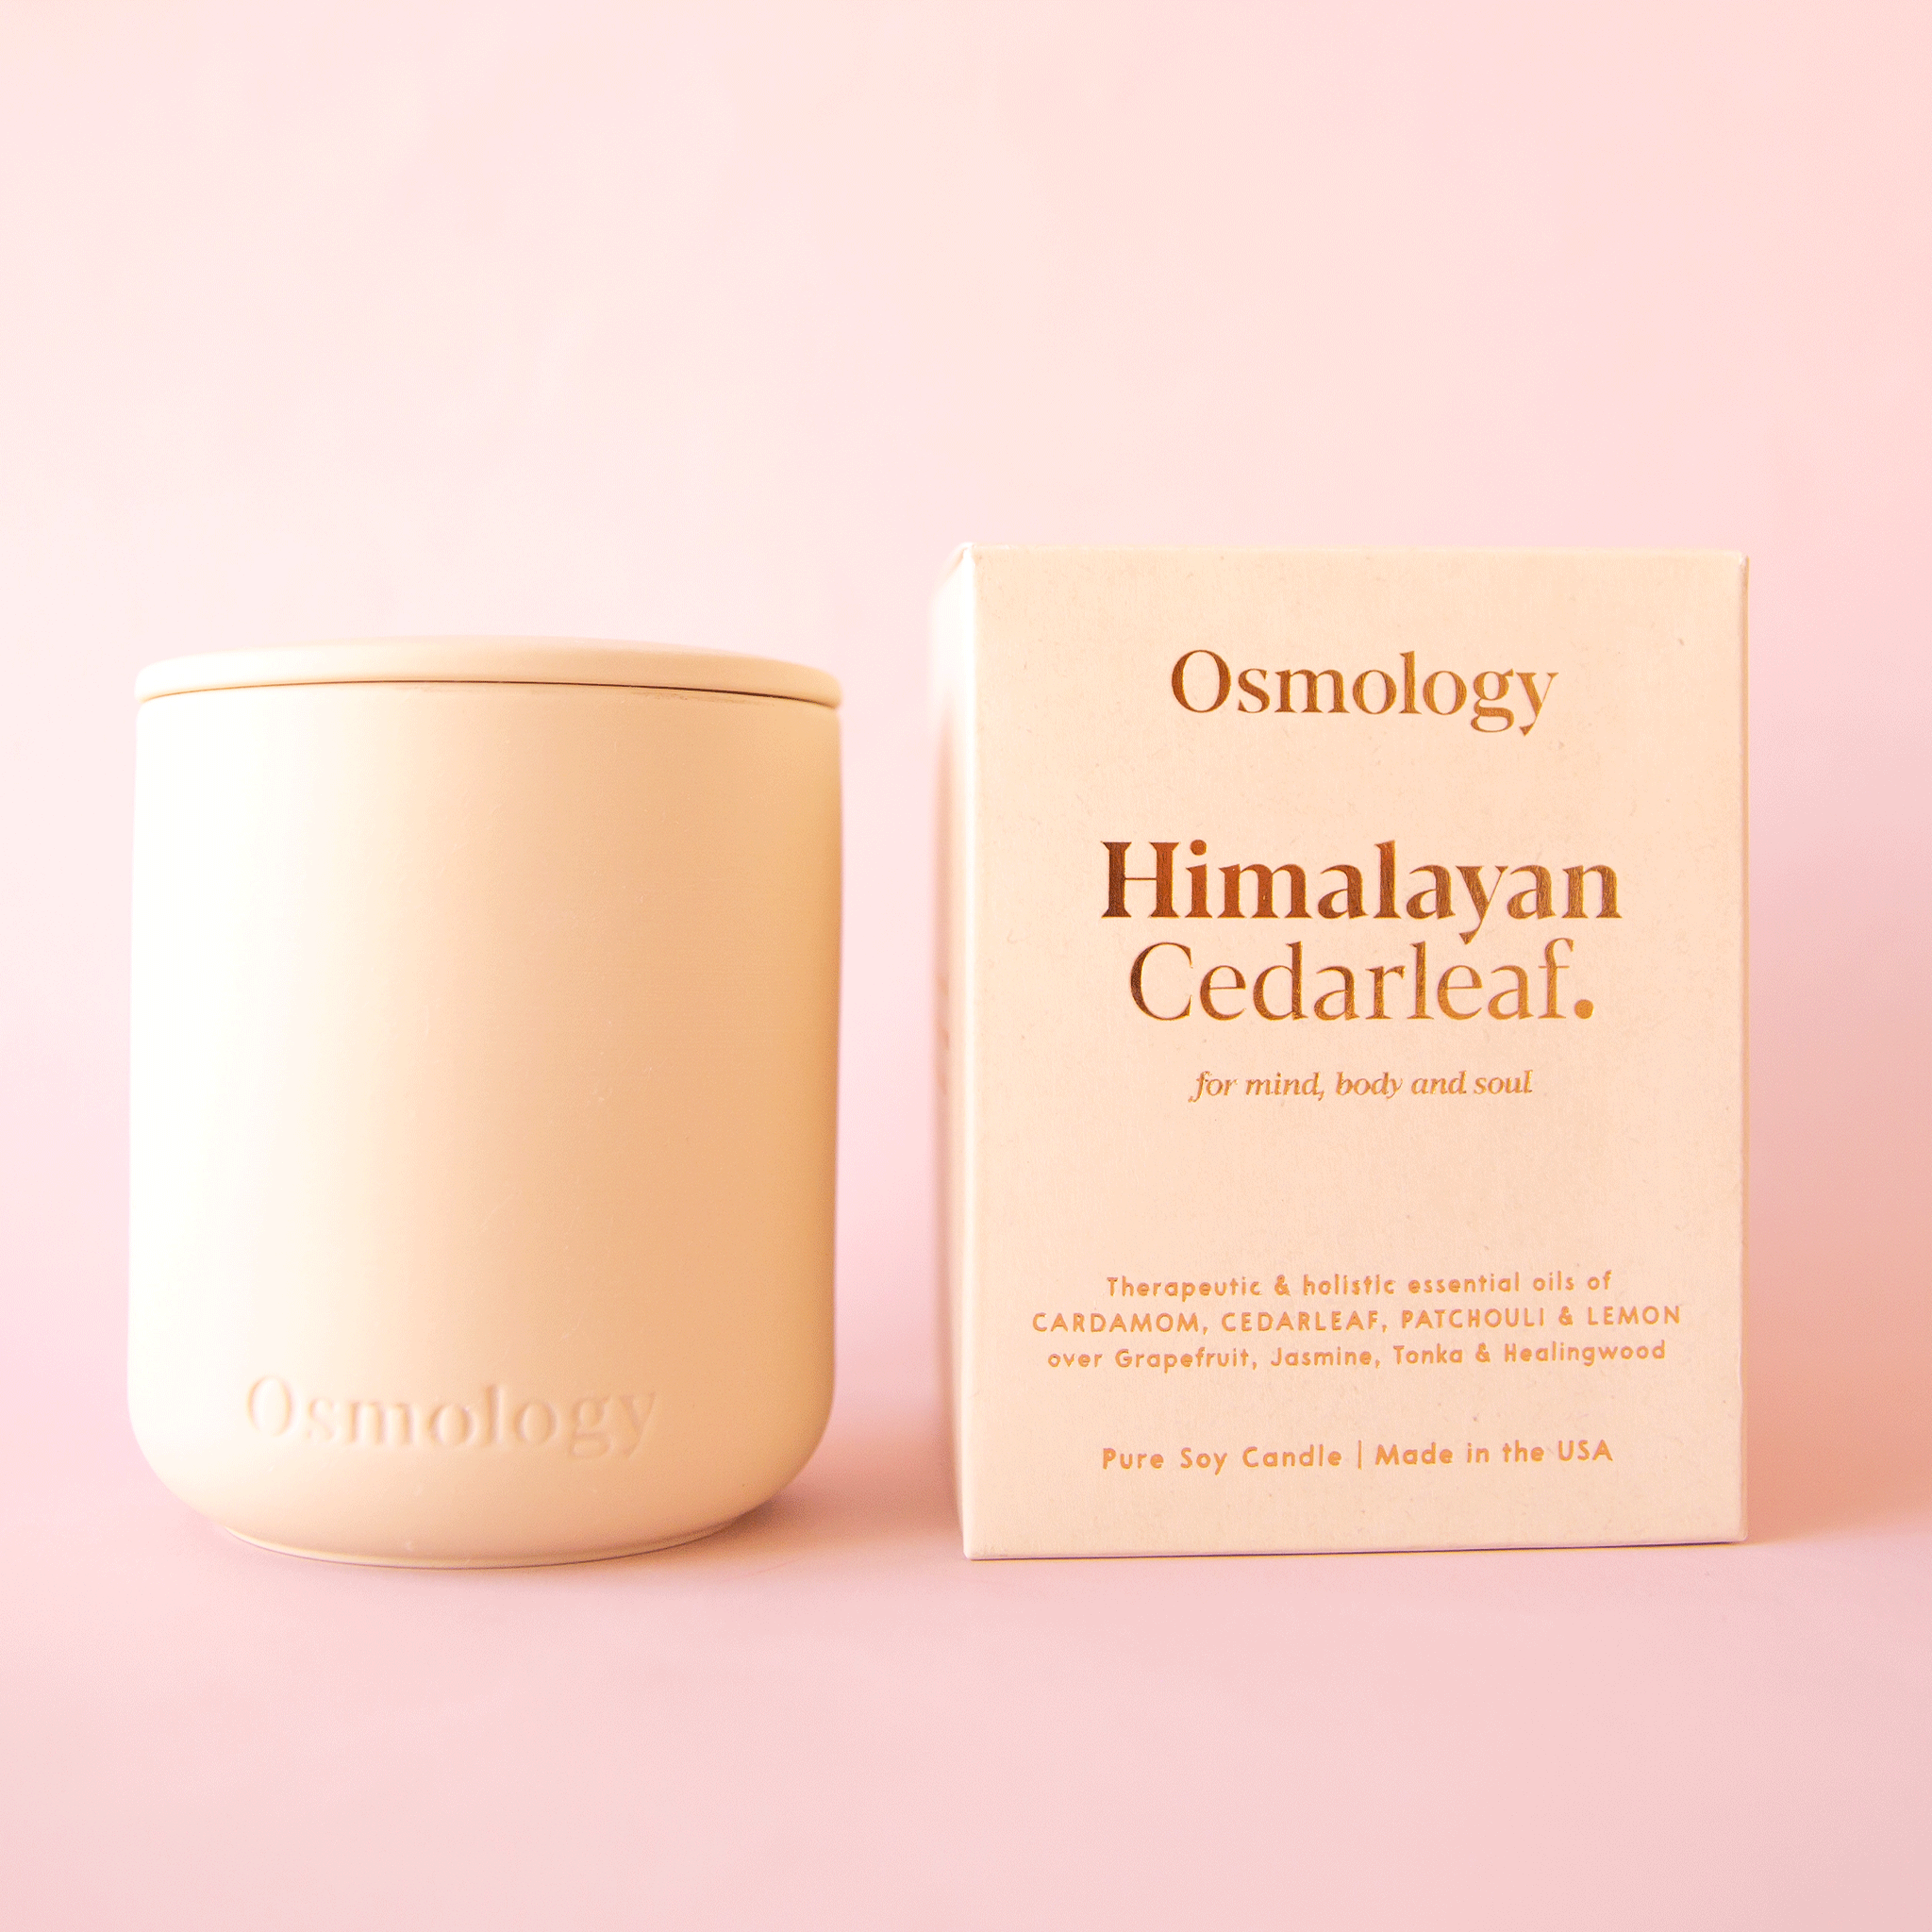 On a pink background is a peachy, tan clay candle with a lid and packaged in a coordinating box that reads, "Osmology Himalayan Cedarleaf.".